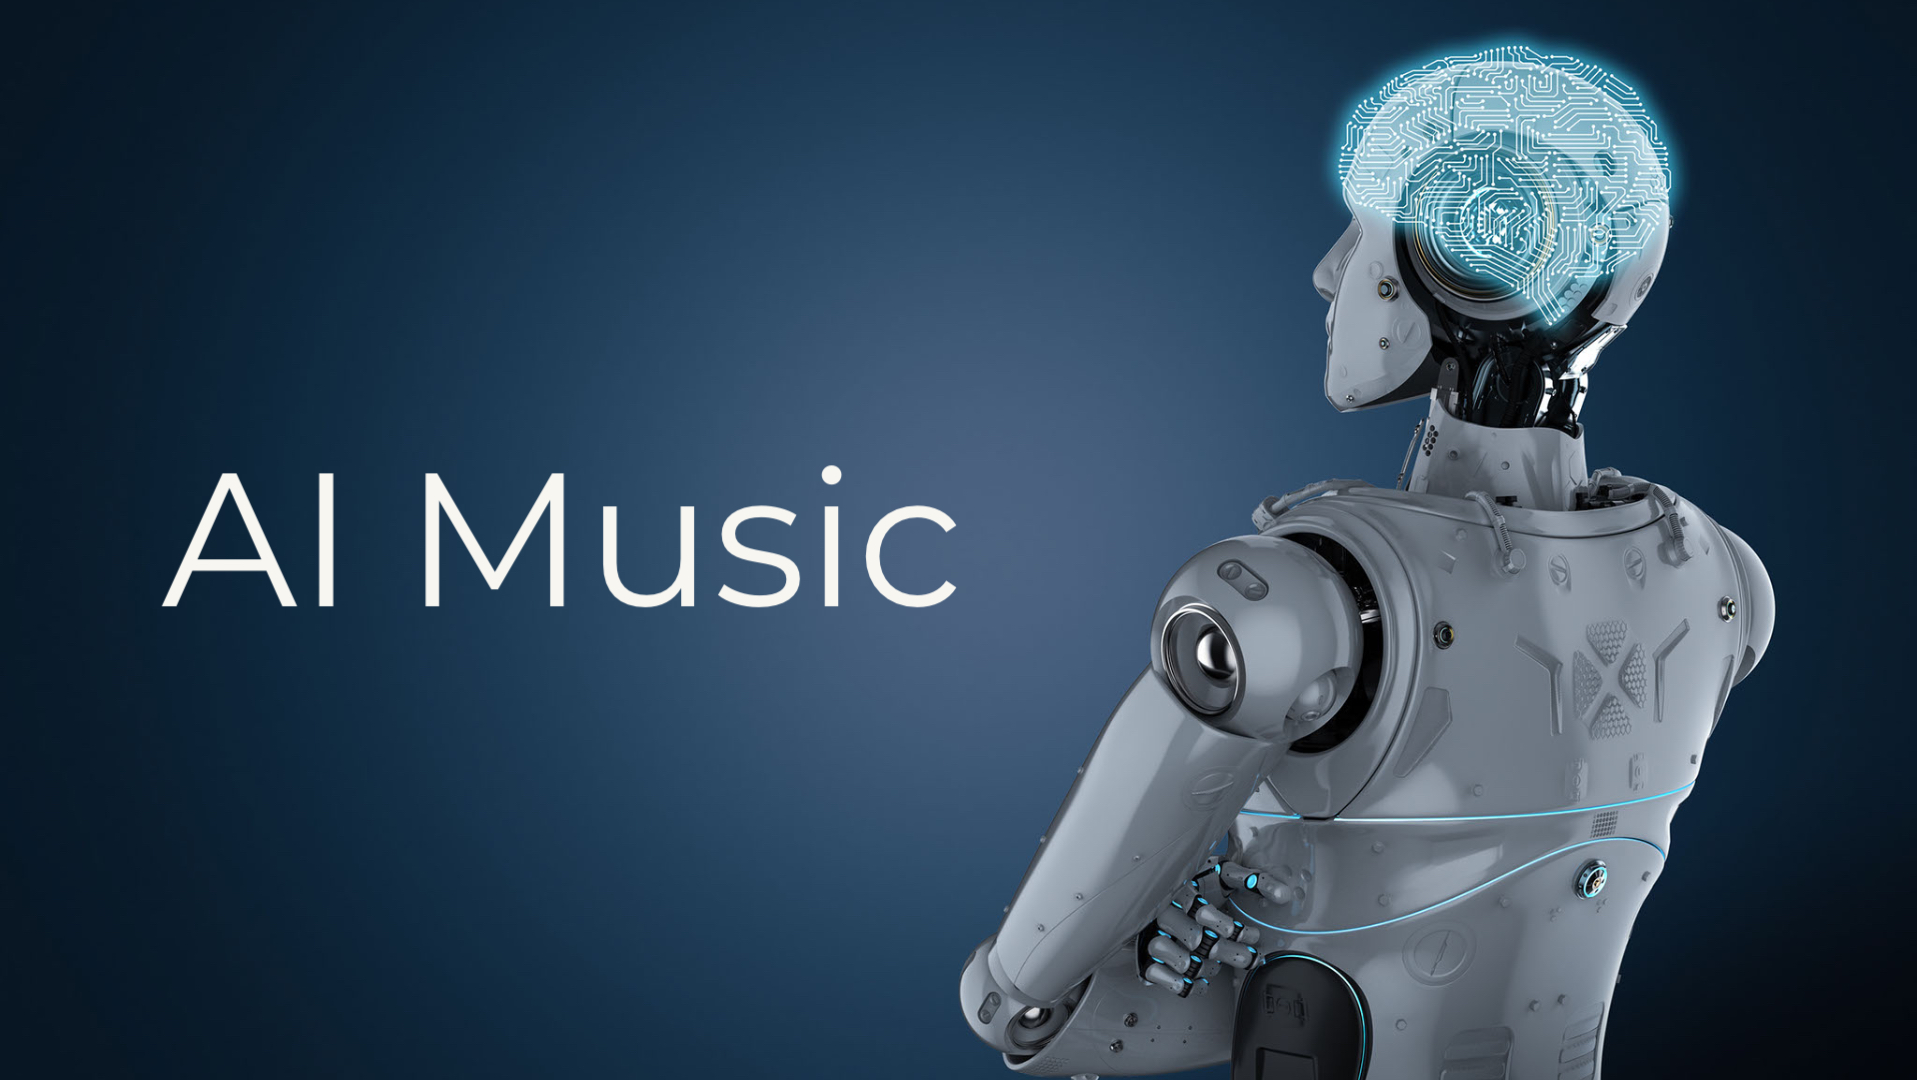 Artificial intelligence has been taking over the music industry recently, with the discovery that you can use AI to copy famous artist voices.